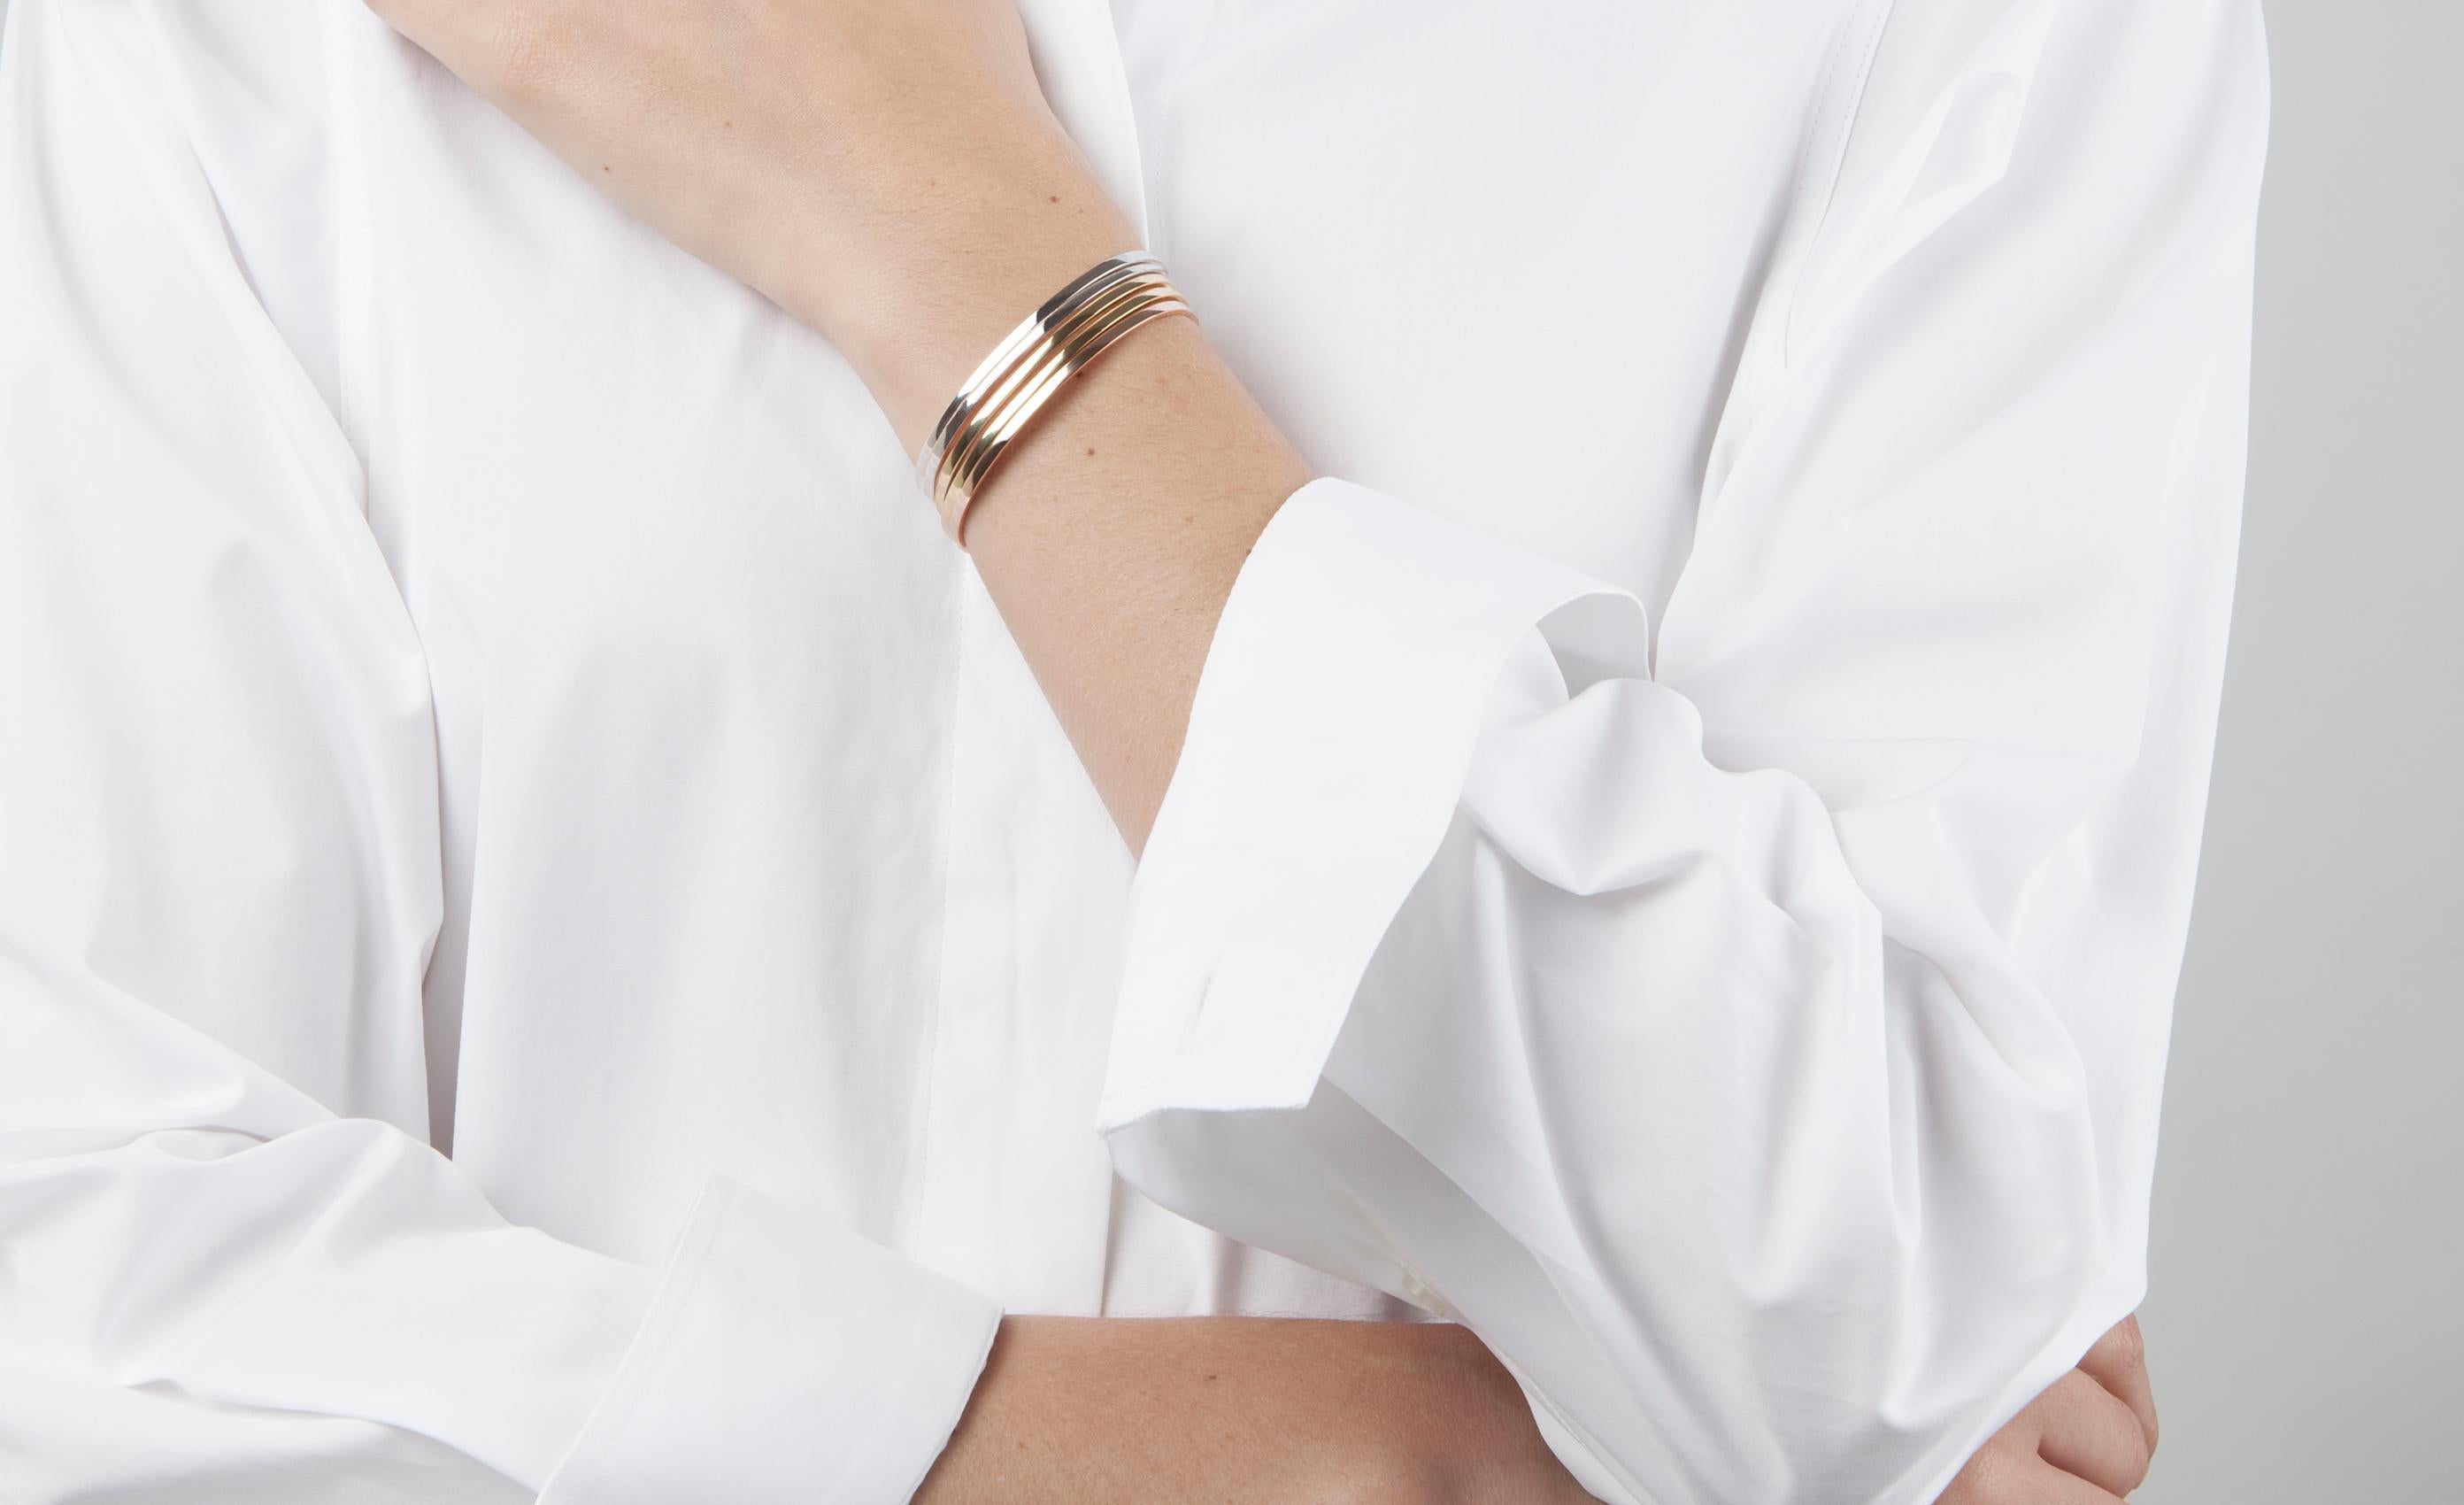 This timeless 14 karat solid white gold bracelet has been designed by Lilian von Trapp in a minimal oval shape. The invisible joint creates a seamless complete form around the wrist for a perfect fit, secured by a small locking mechanism on the